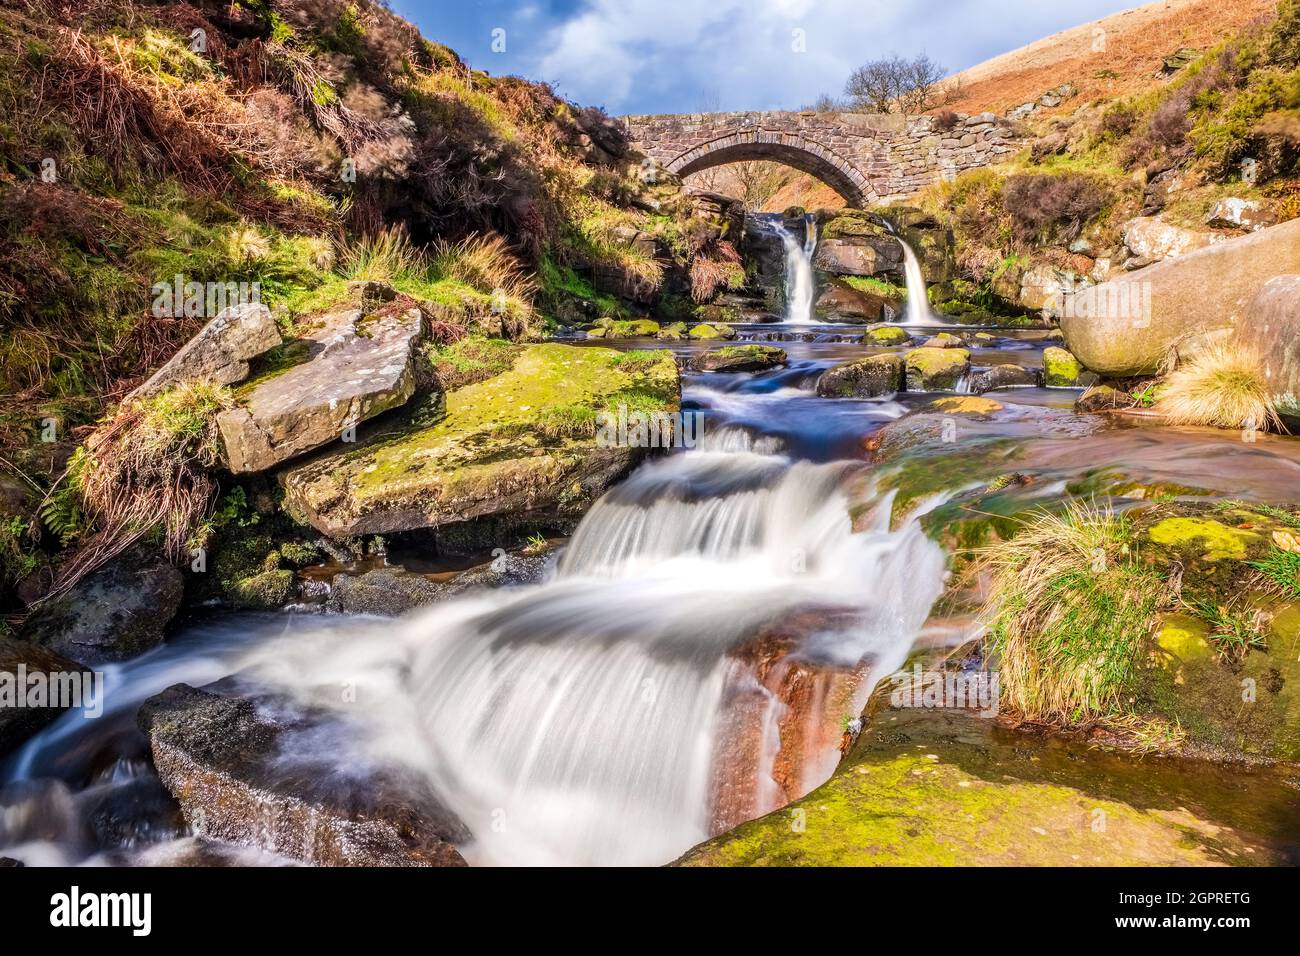 Three Shires Bridge / Three Shire Heads - a meeting of packhorse routes at a bridge marking the junction of 3 counties, Peak District National Park Stock Photo